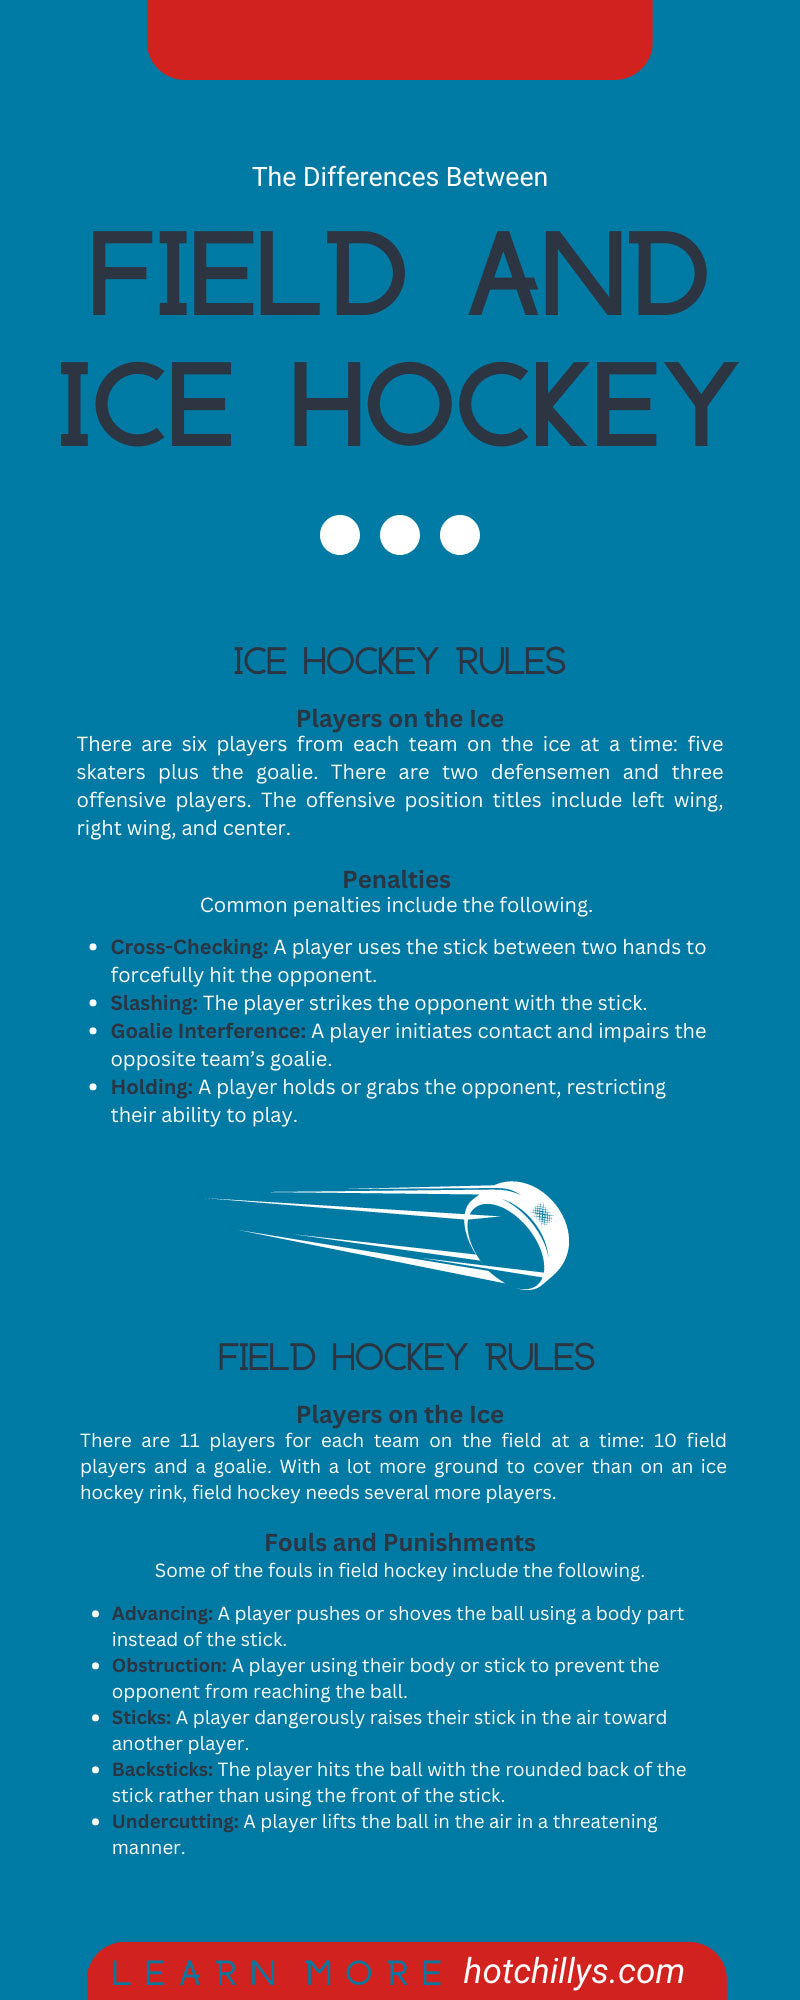 The Differences Between Field and Ice Hockey